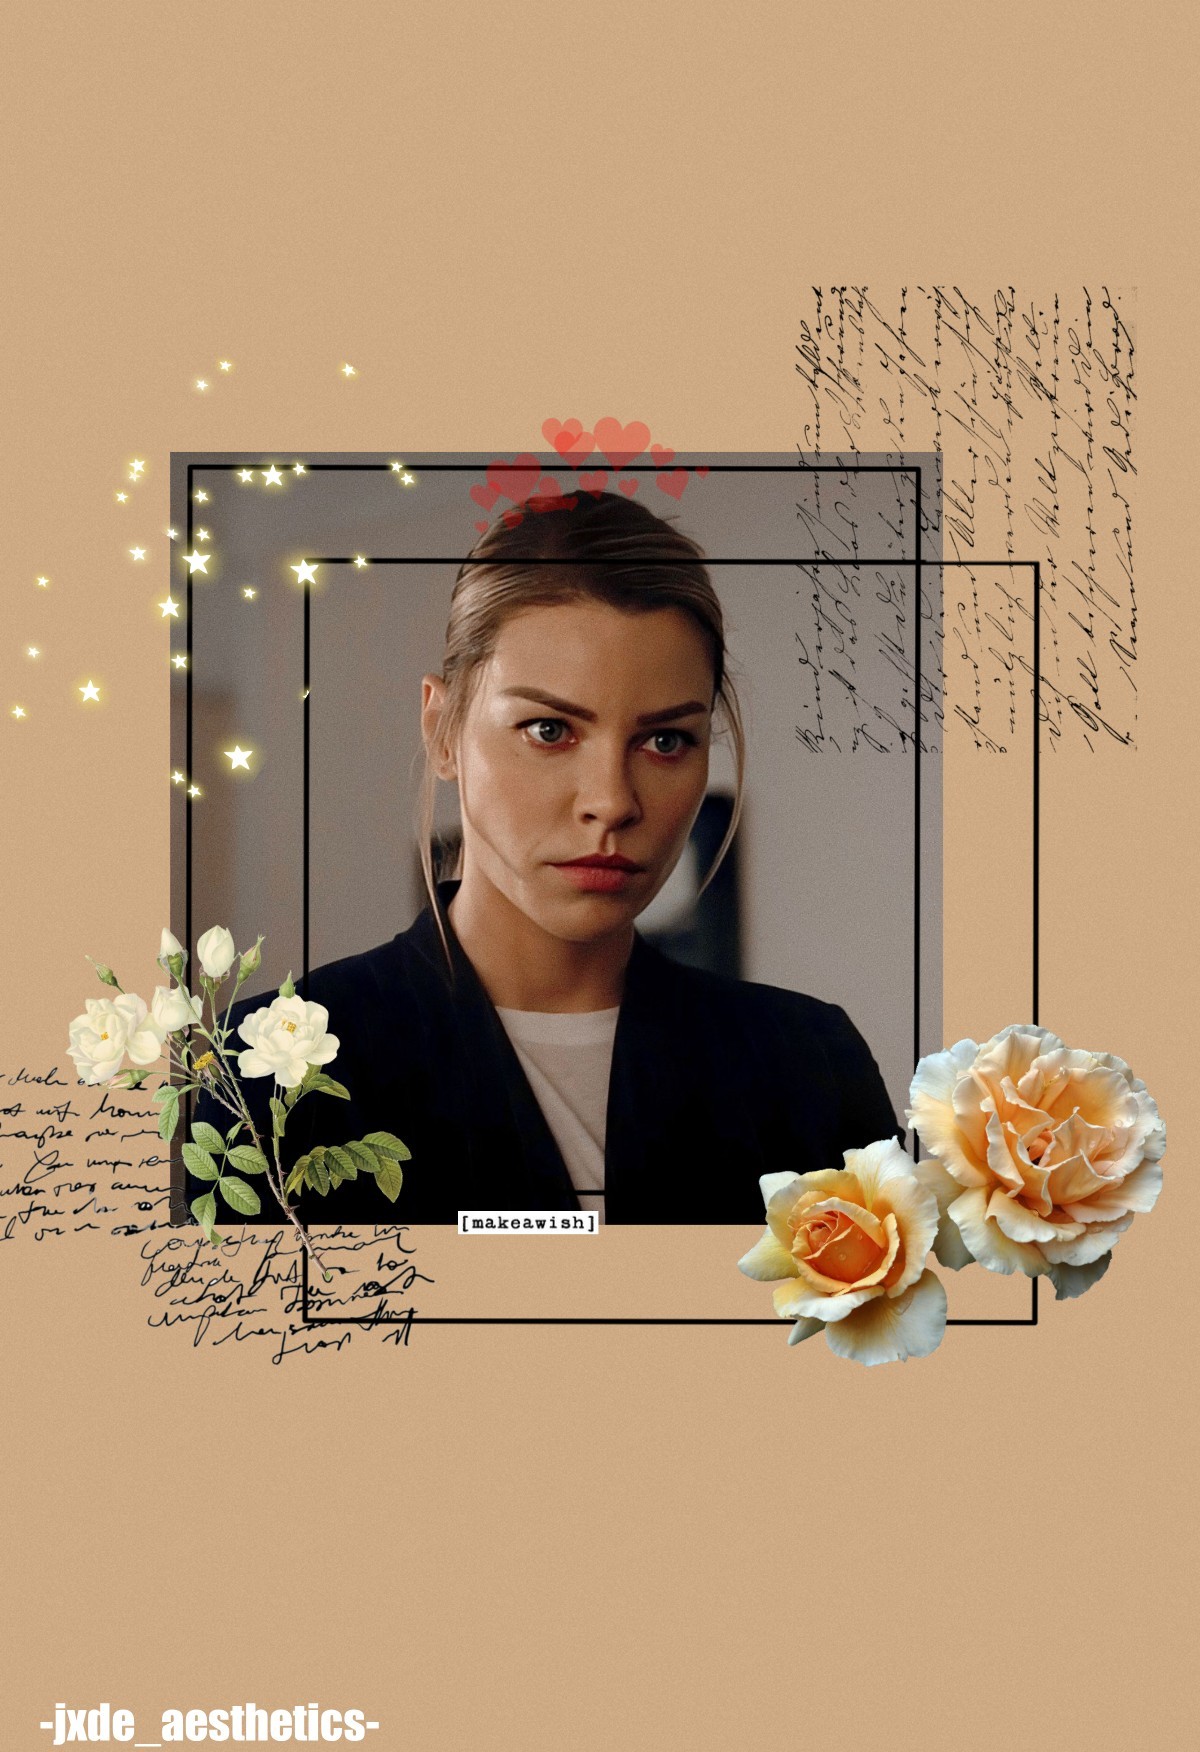 ✨tap✨
goodnight everyone have an amazing day night or afternoon !!
if your wondering this is Lauren German <3